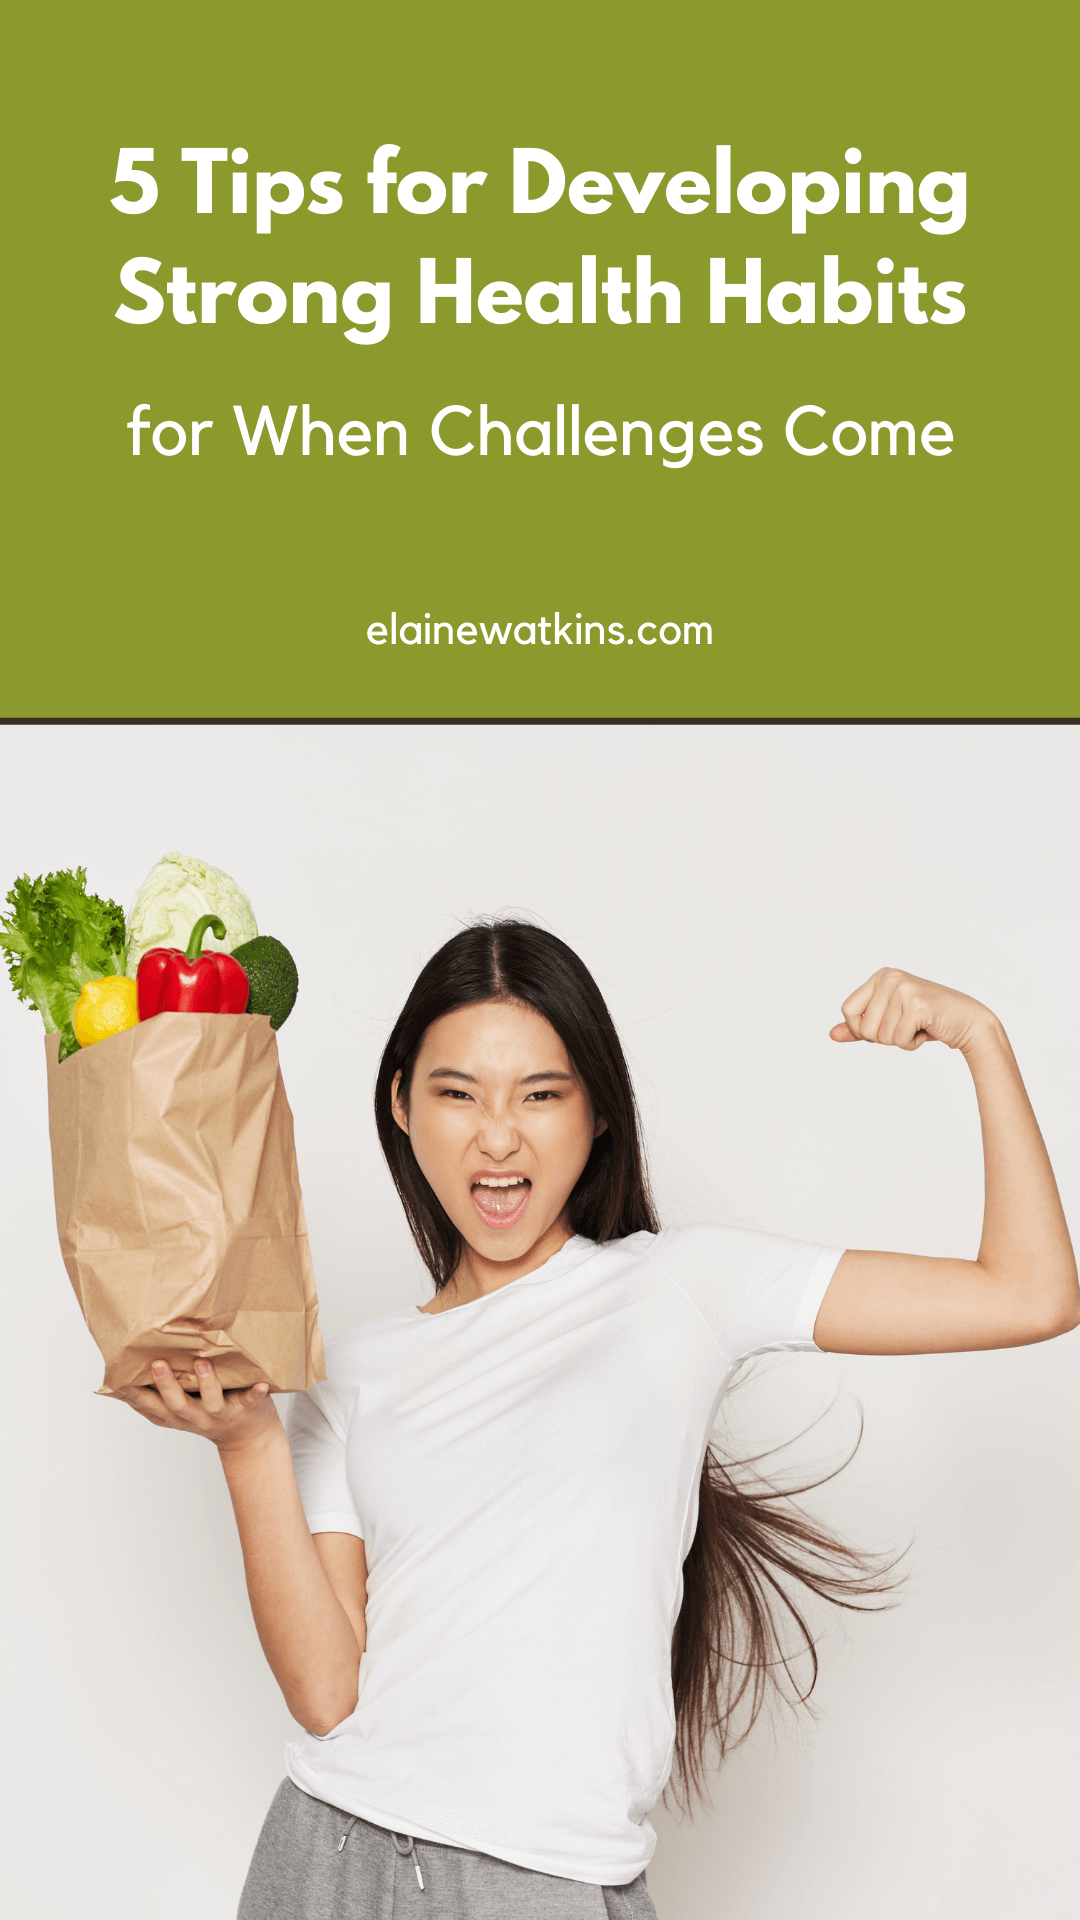 5 Tips for Developing Strong Health Habits for When Challenges Come